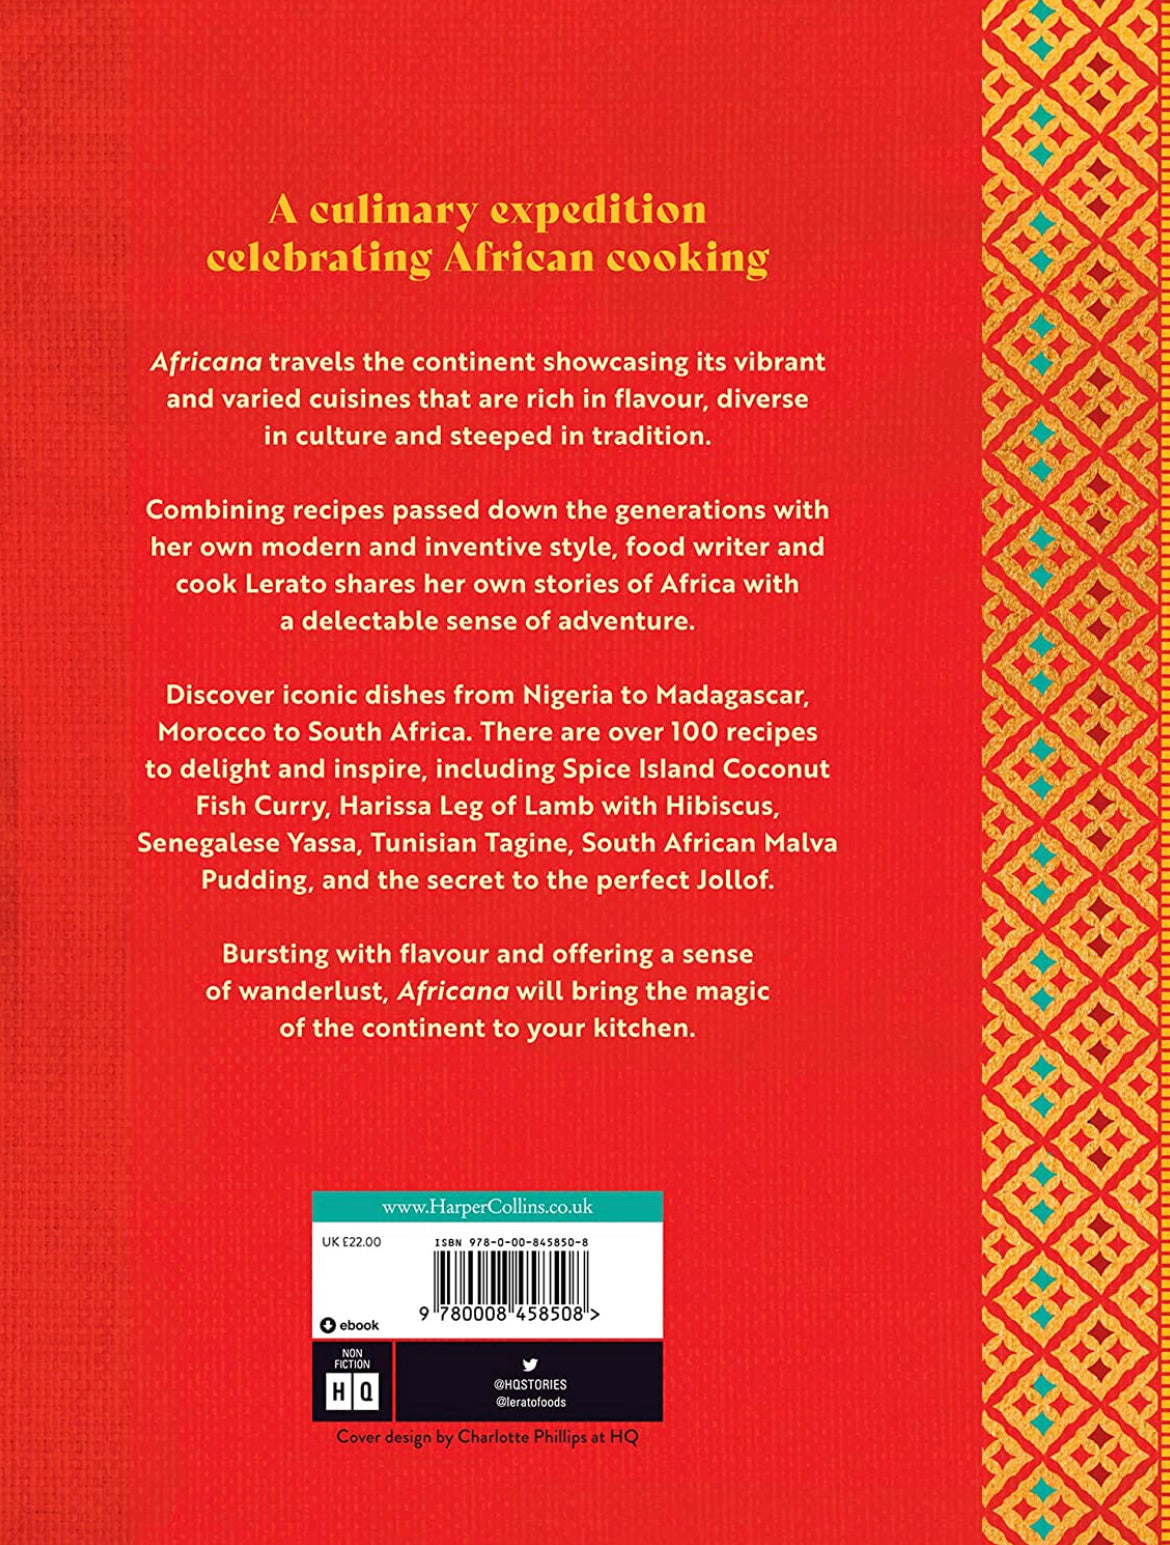 PRE-ORDER AFRICANA COOK BOOK - Signed Copy